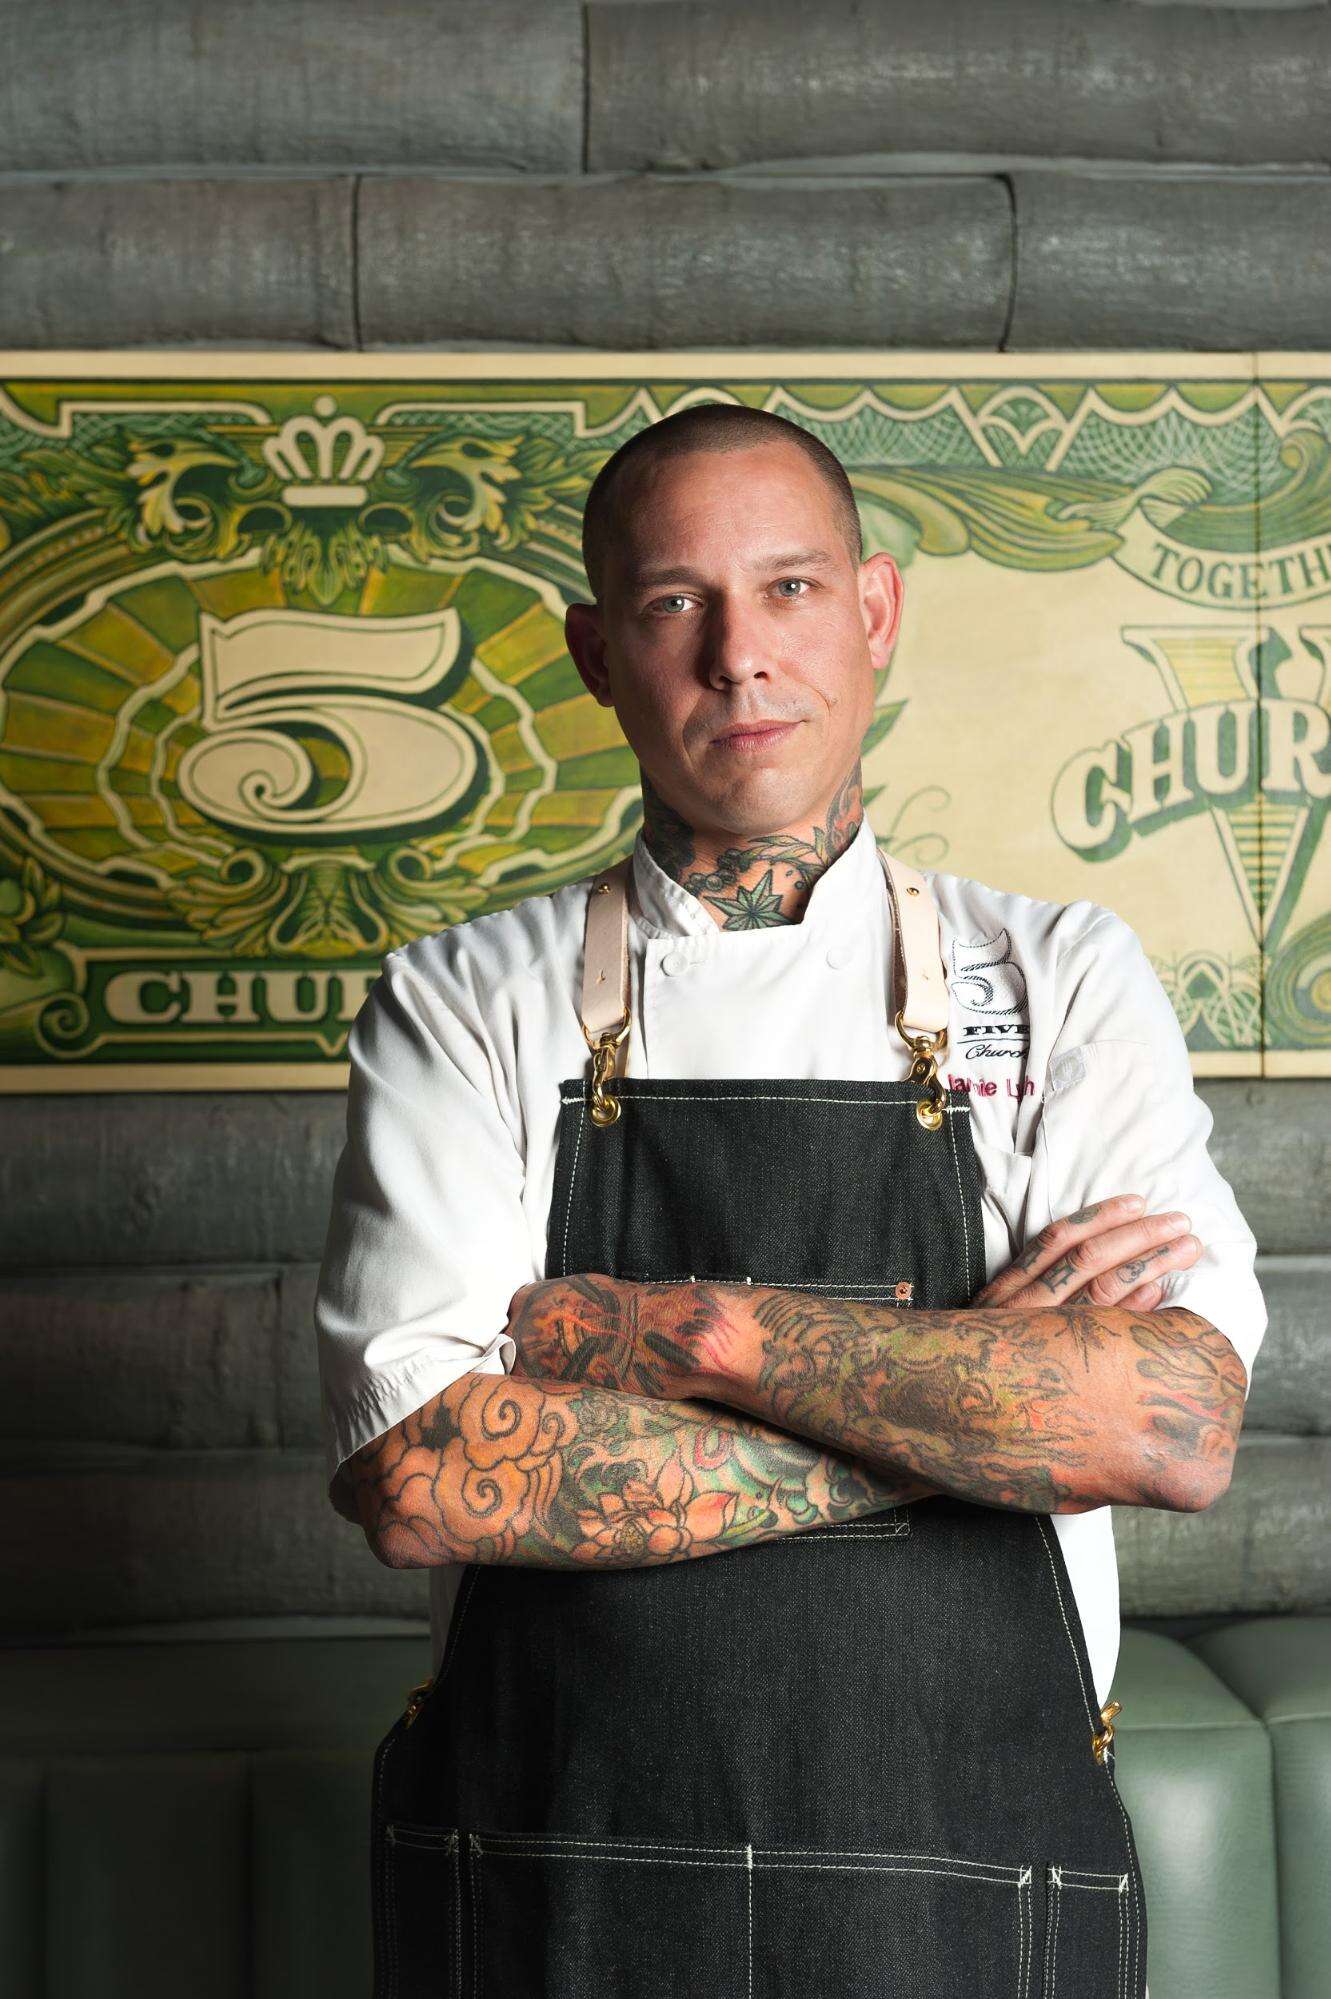 charlotte chef of the year